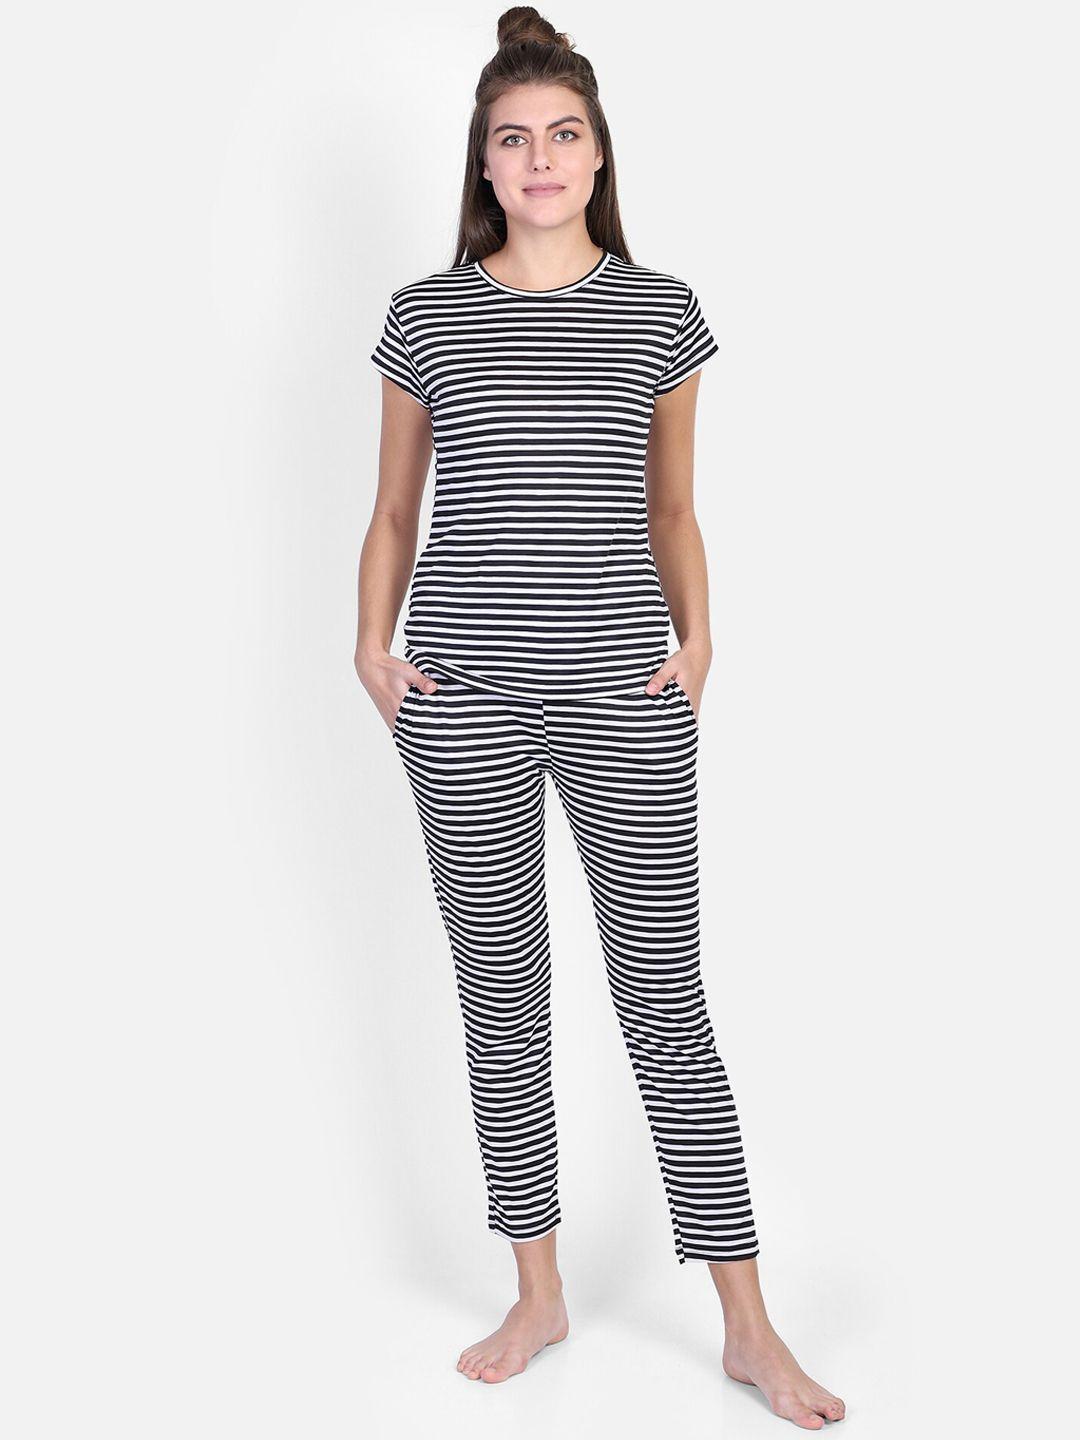 proteens-women-black-&-white-striped-night-suit